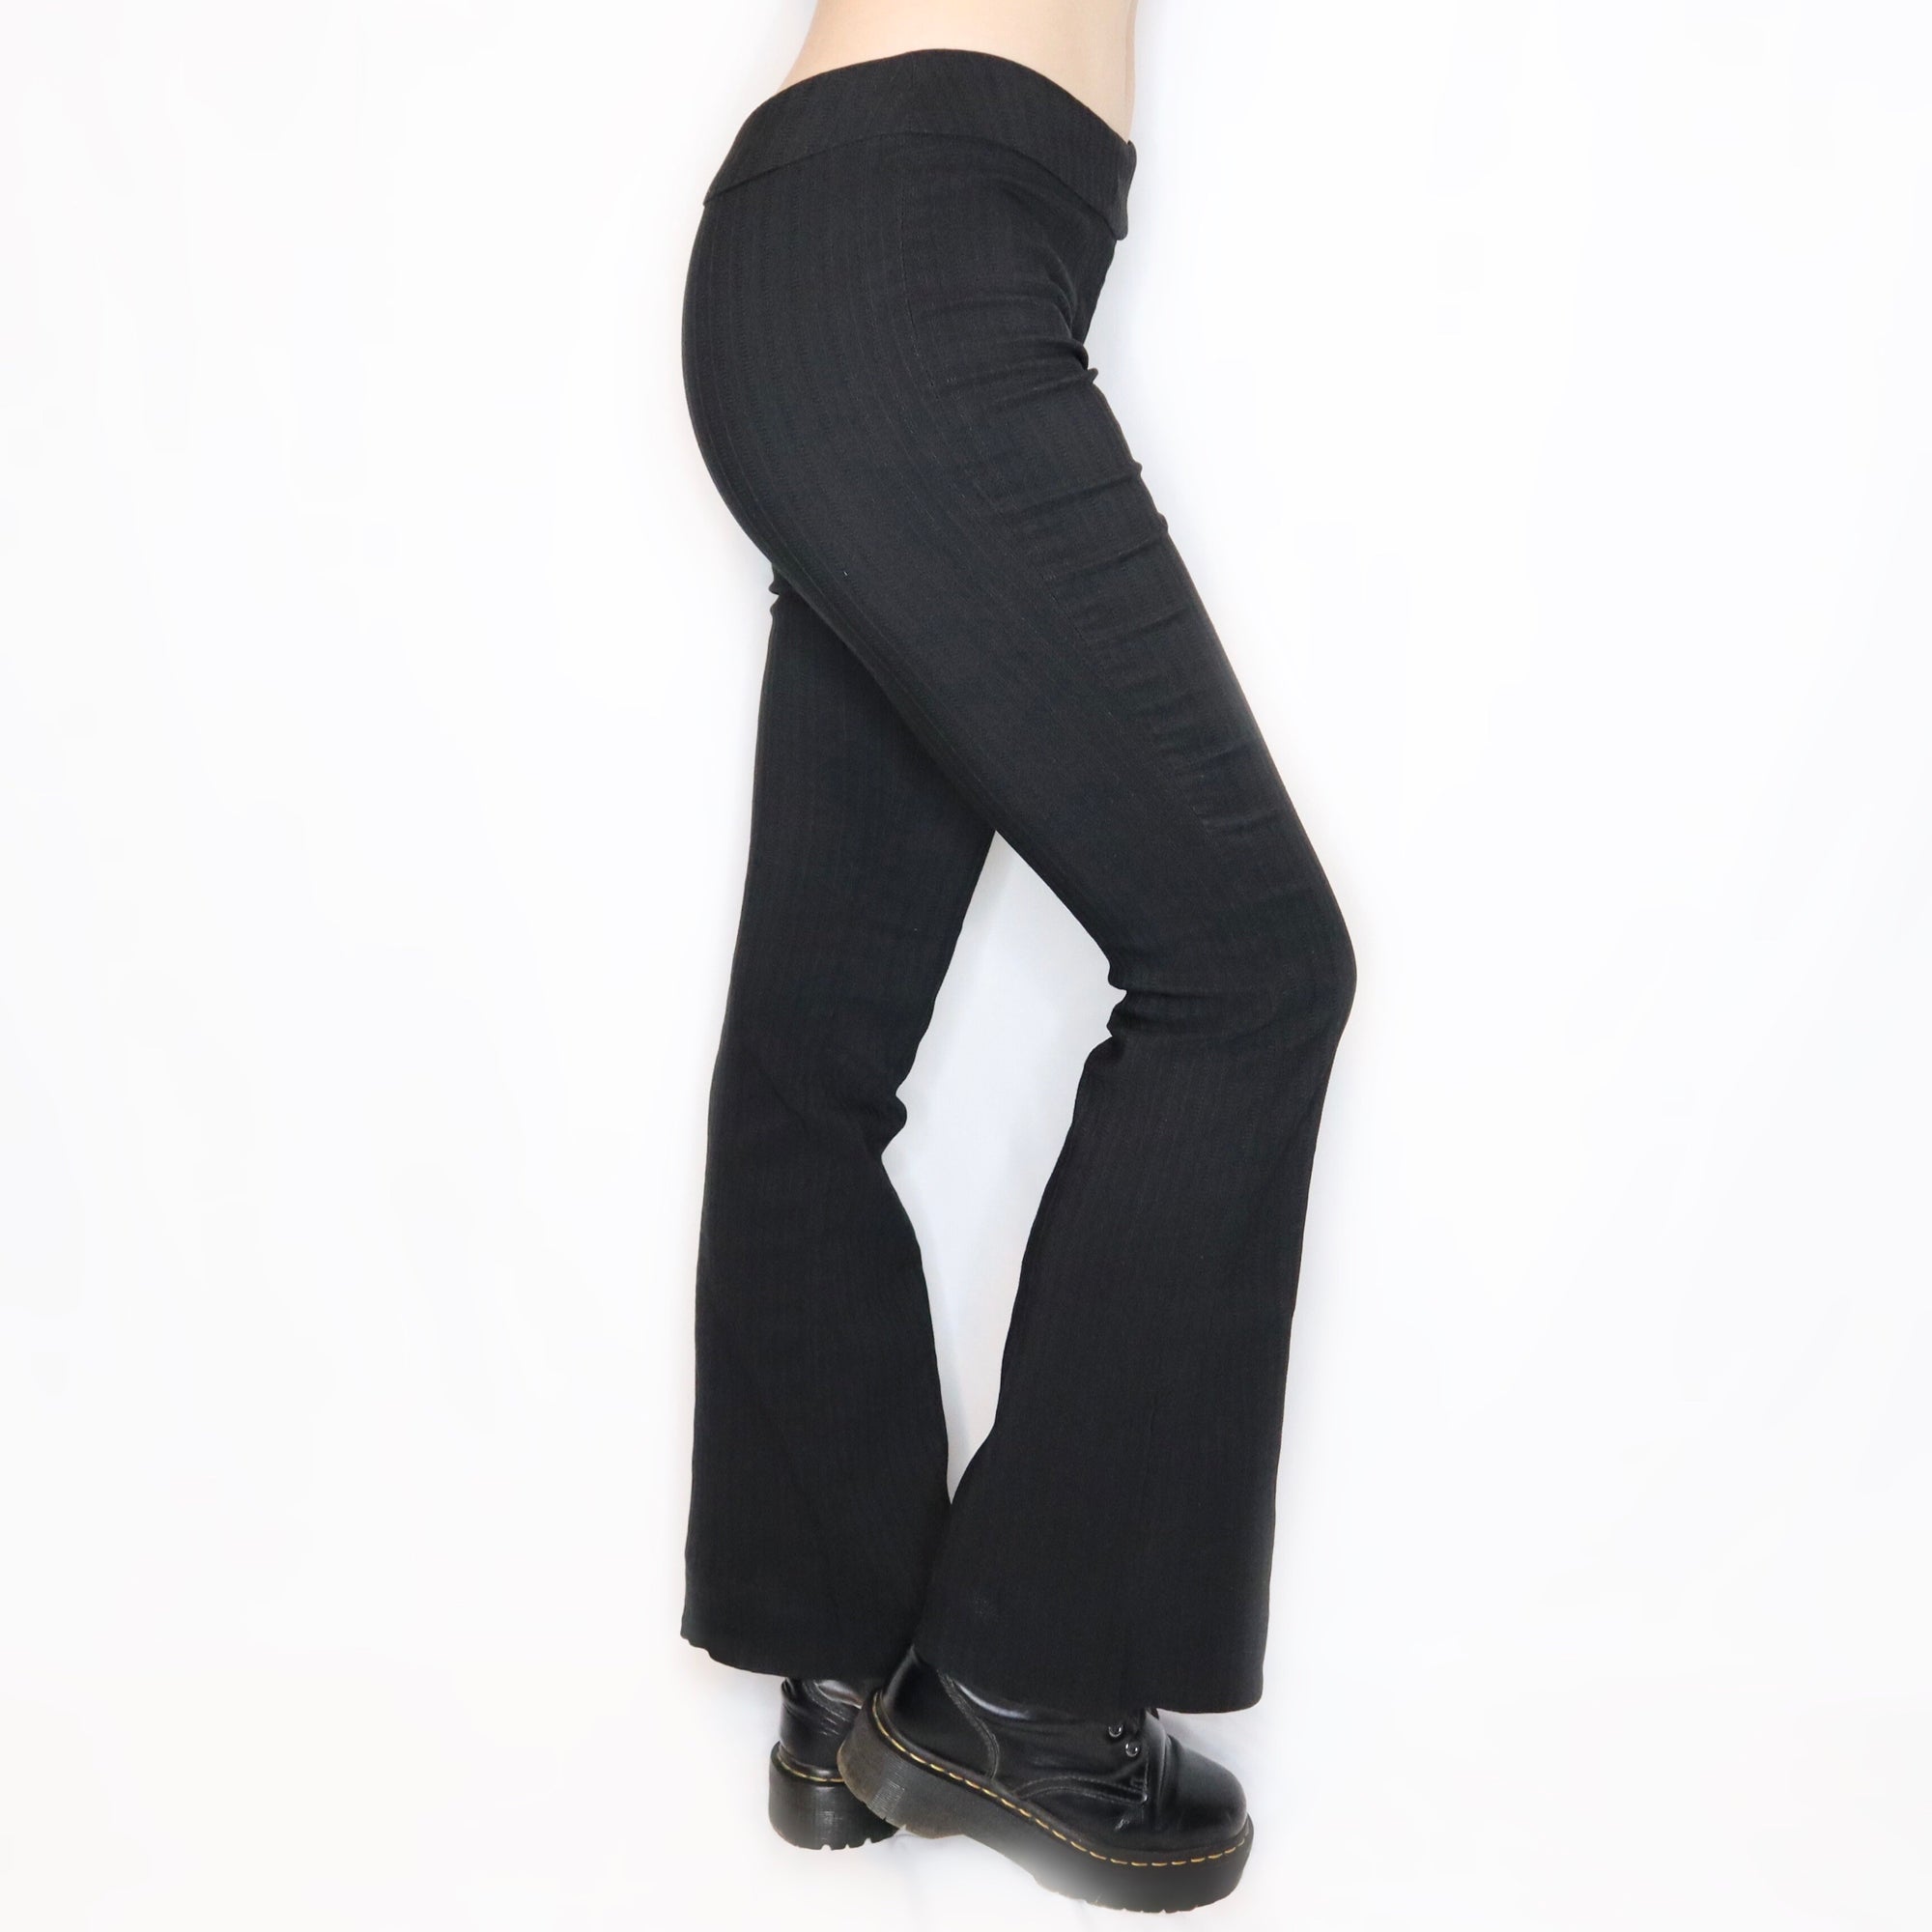 Vintage Early 2000s Low Rise Black Pinstripe Flare Pants